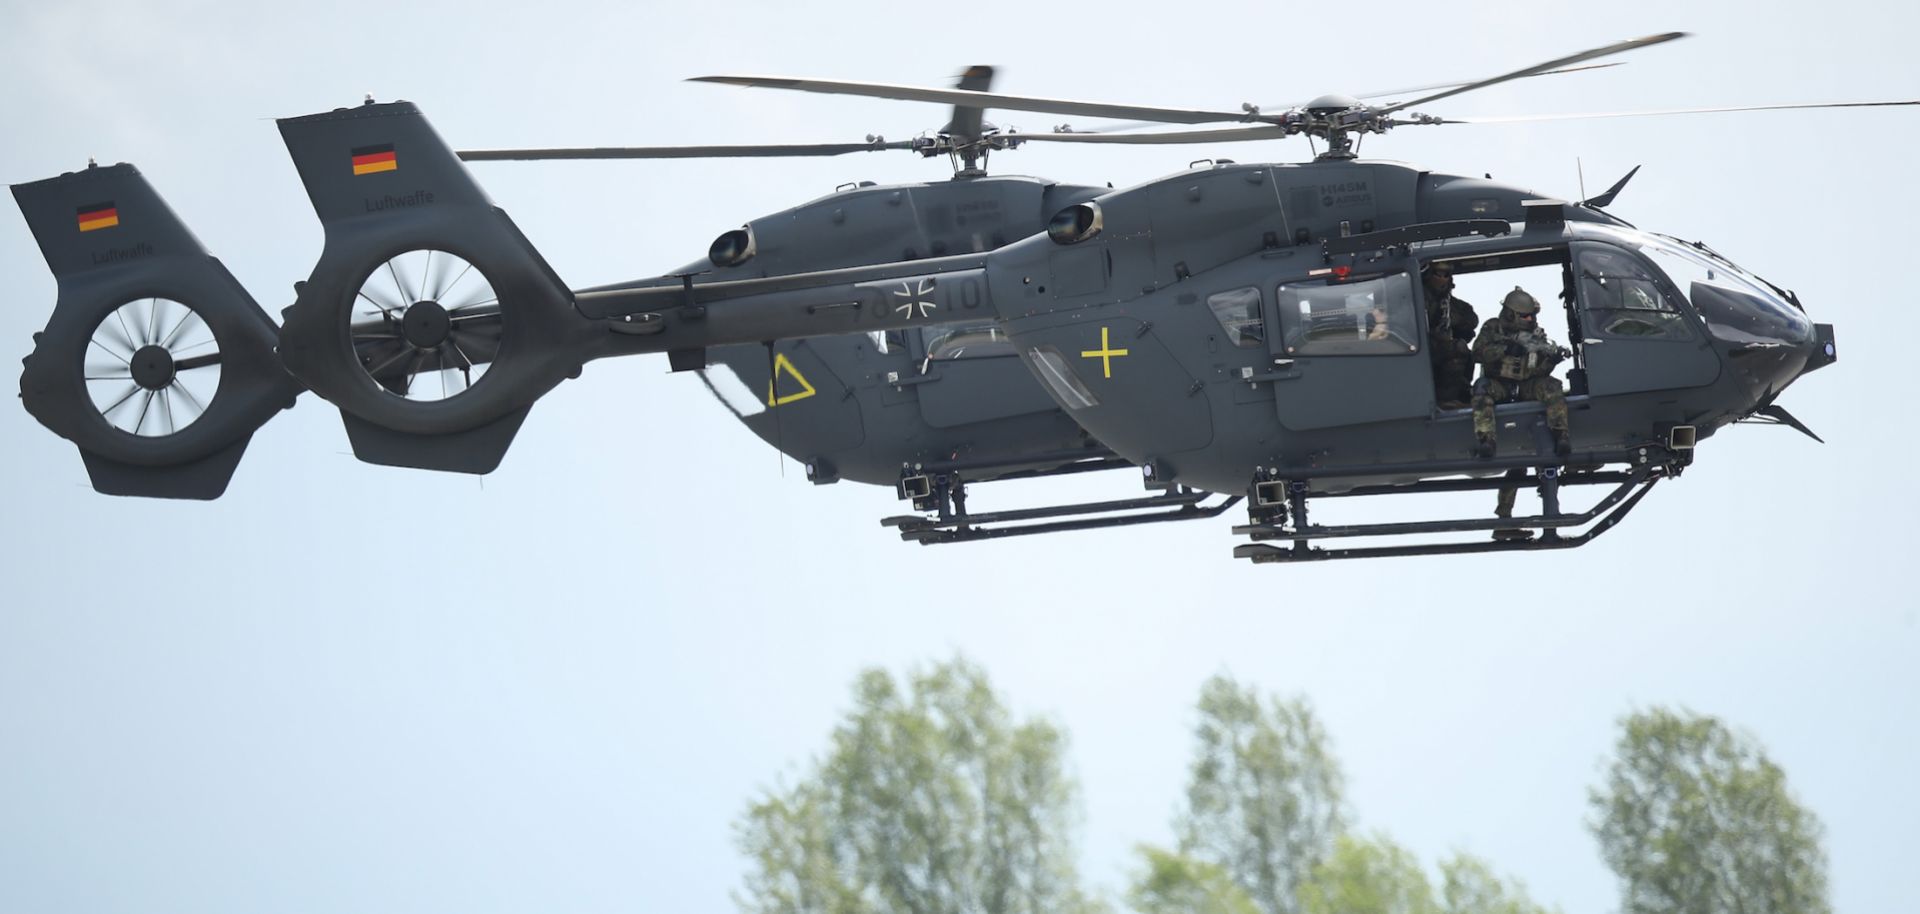 Germany's armed forces, the Bundeswehr, conduct a special forces simulation with two Airbus H145M helicopters at an air show in Schoenefeld, Germany, in April 2018.